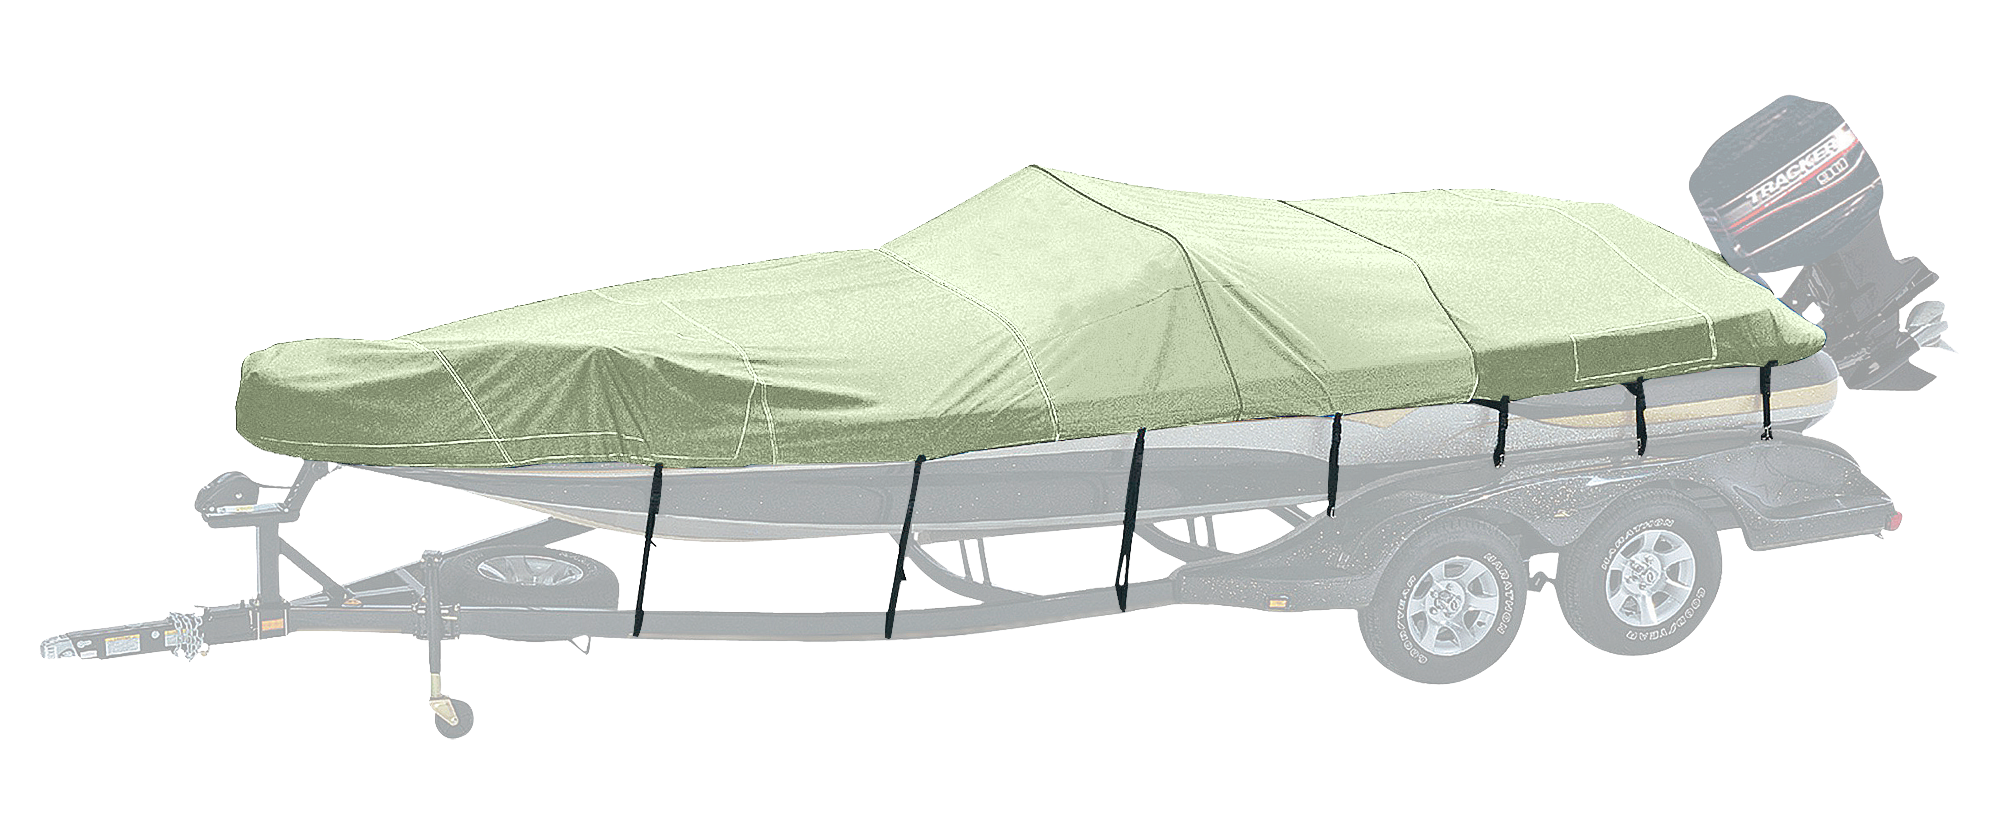 Bass Pro Shops Exact Fit Boat Cover by Westland - Tahoe - '04-'05 254 DB Standard I/O w/Ext. - Linen